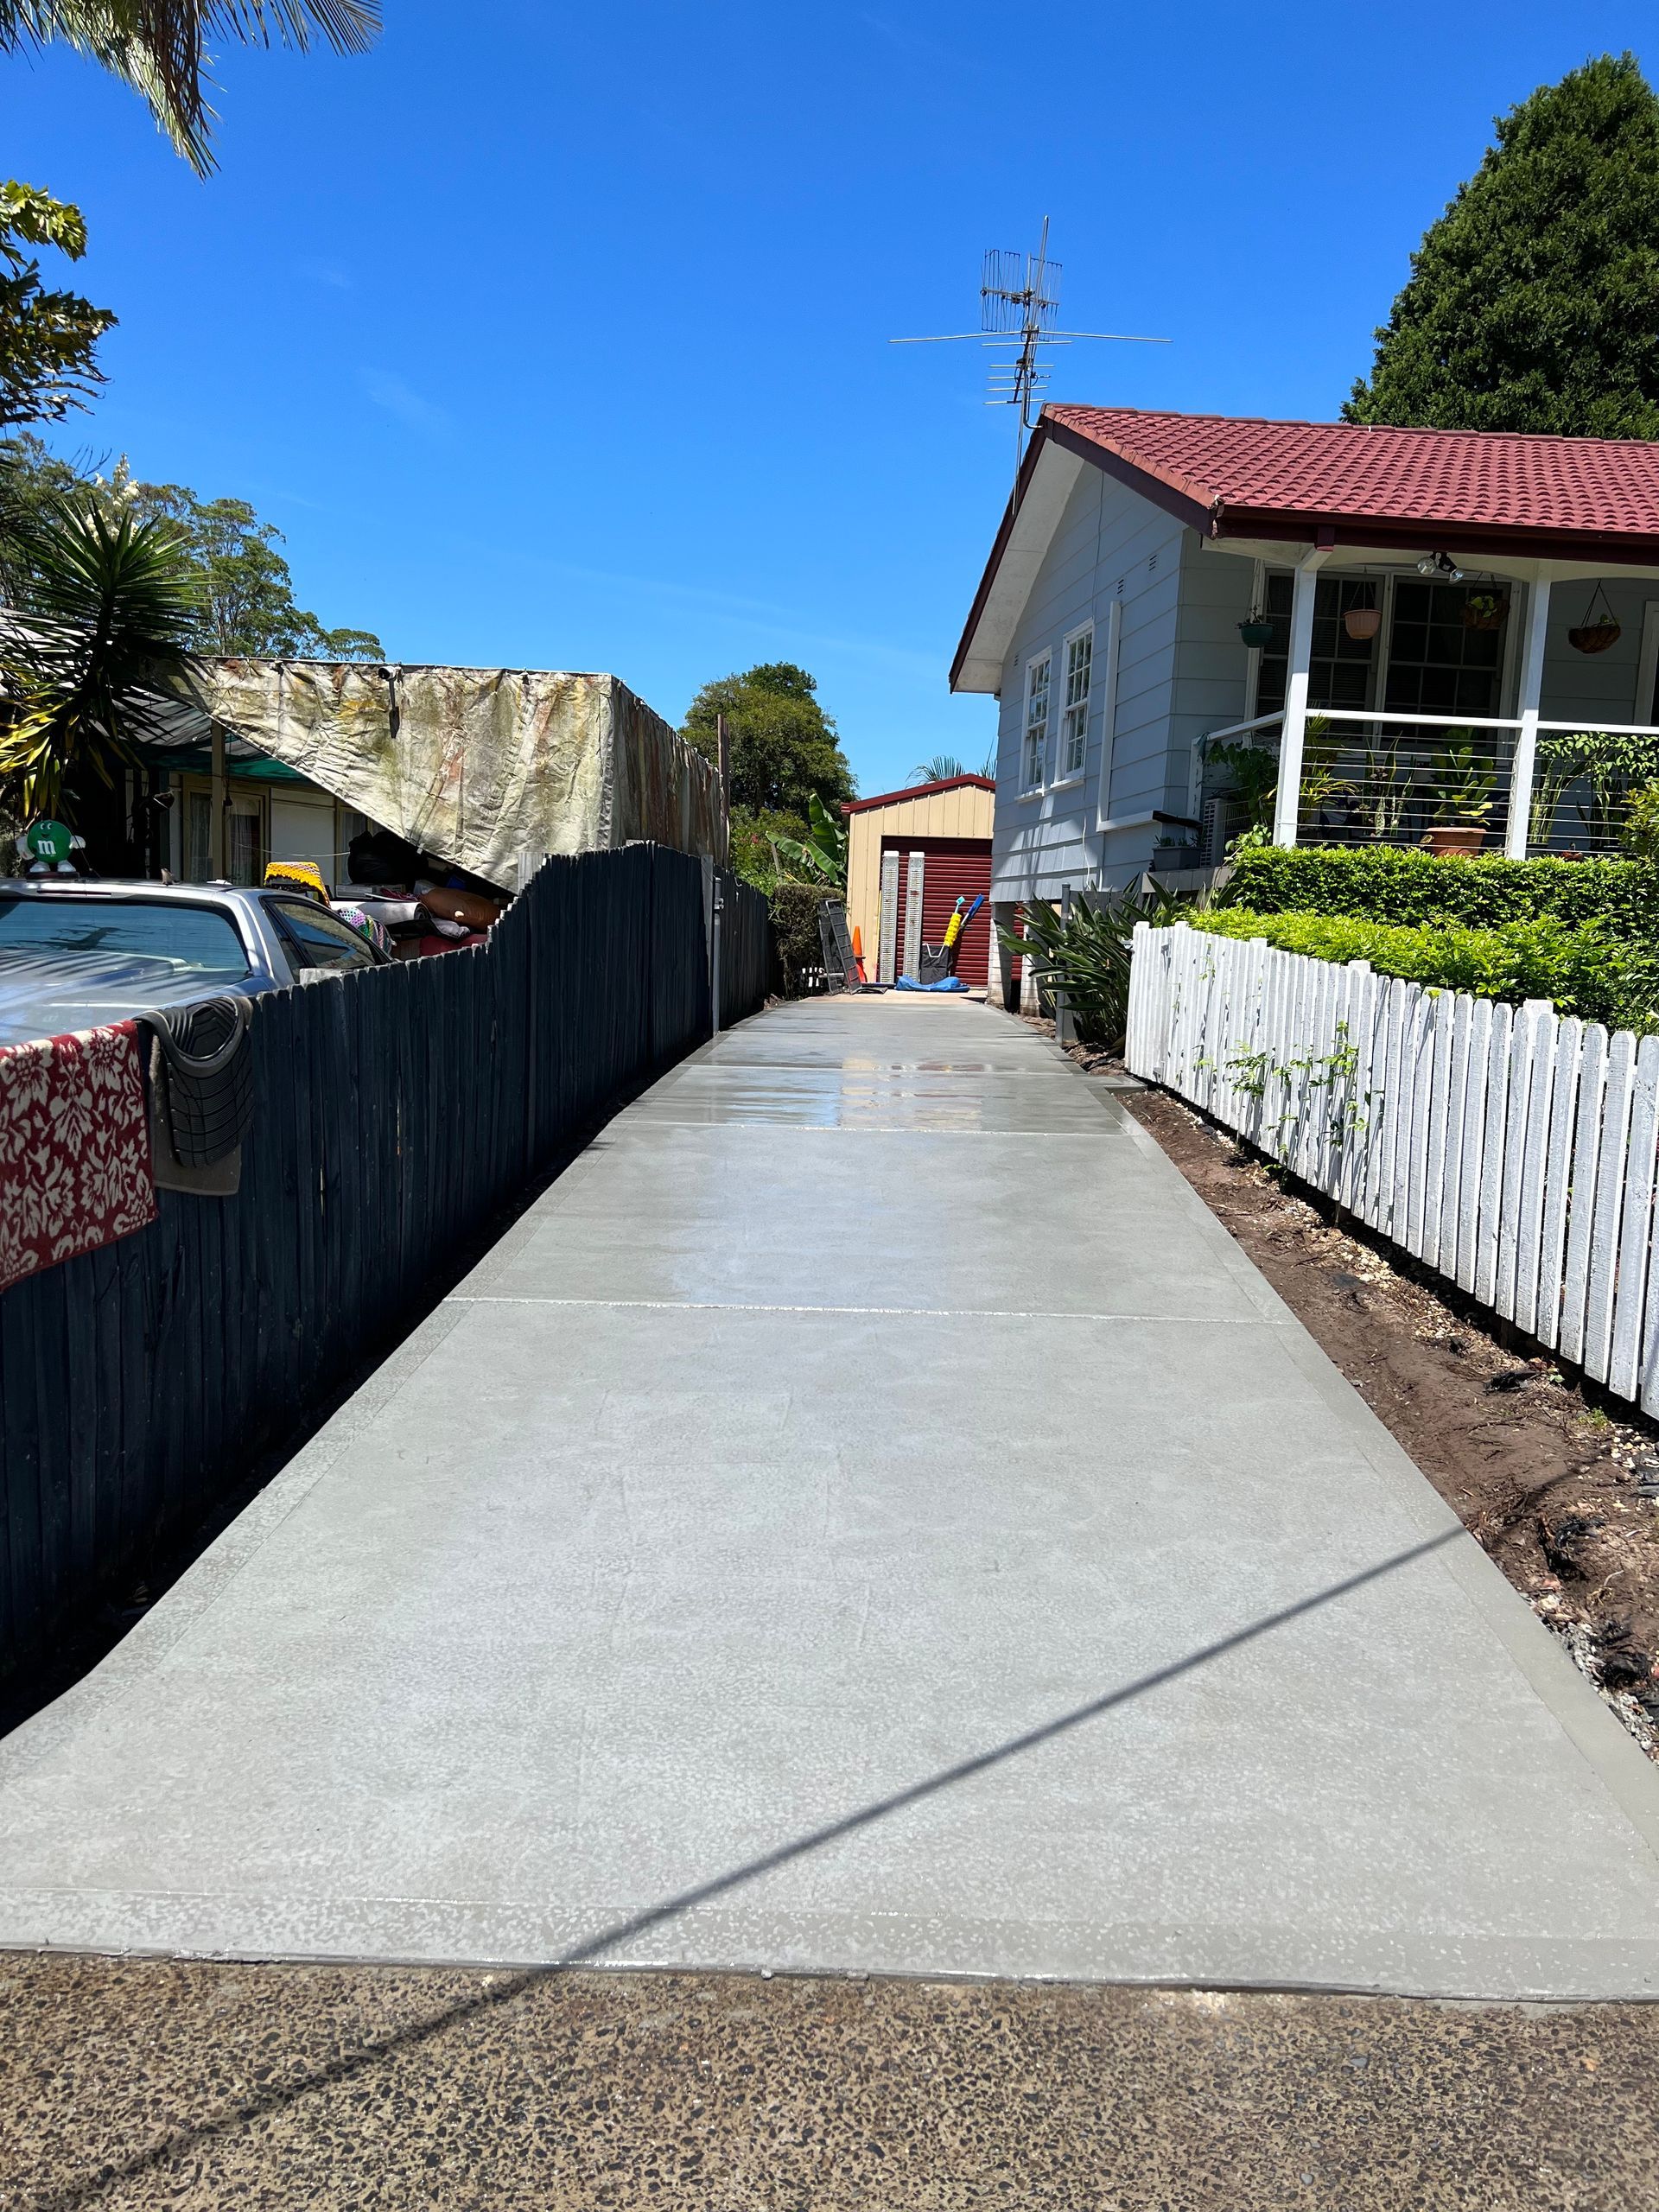 Concrete Driveway - Contact Our Concreters in Gosford, NSW